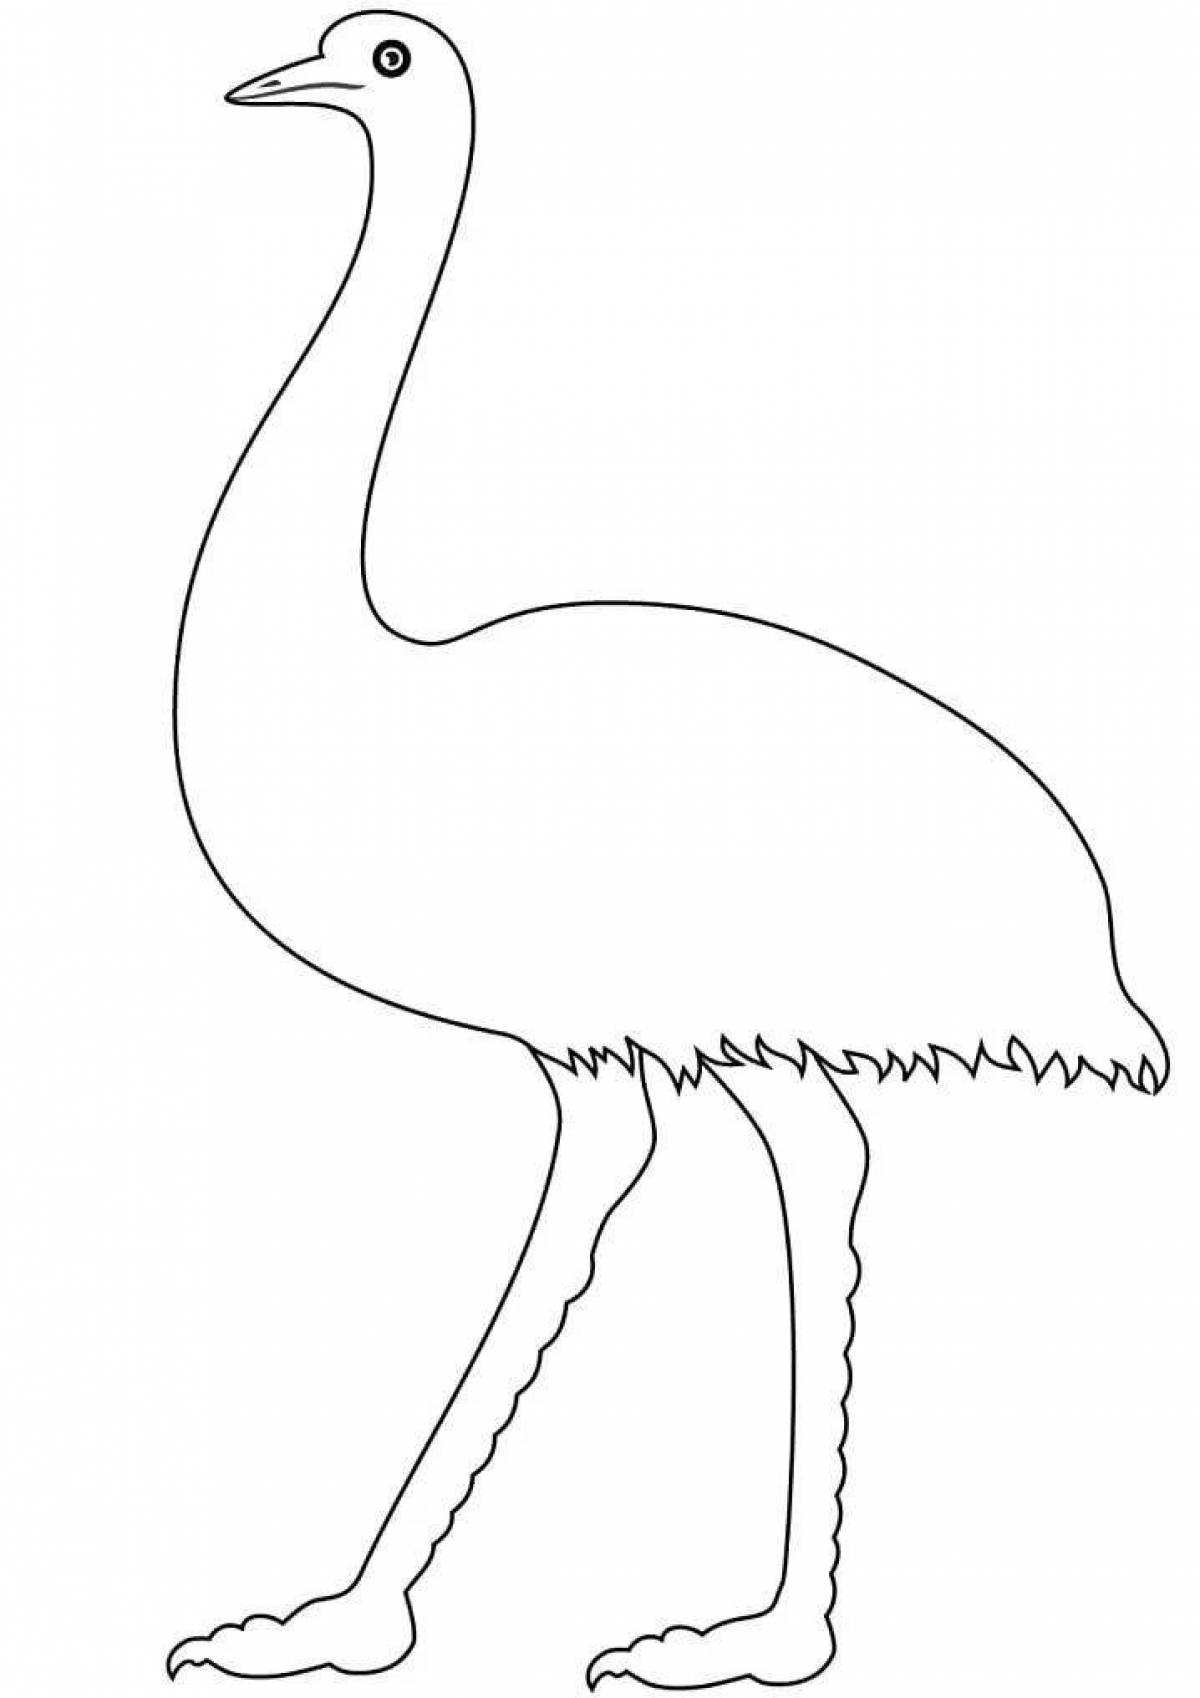 Glowing emu coloring page